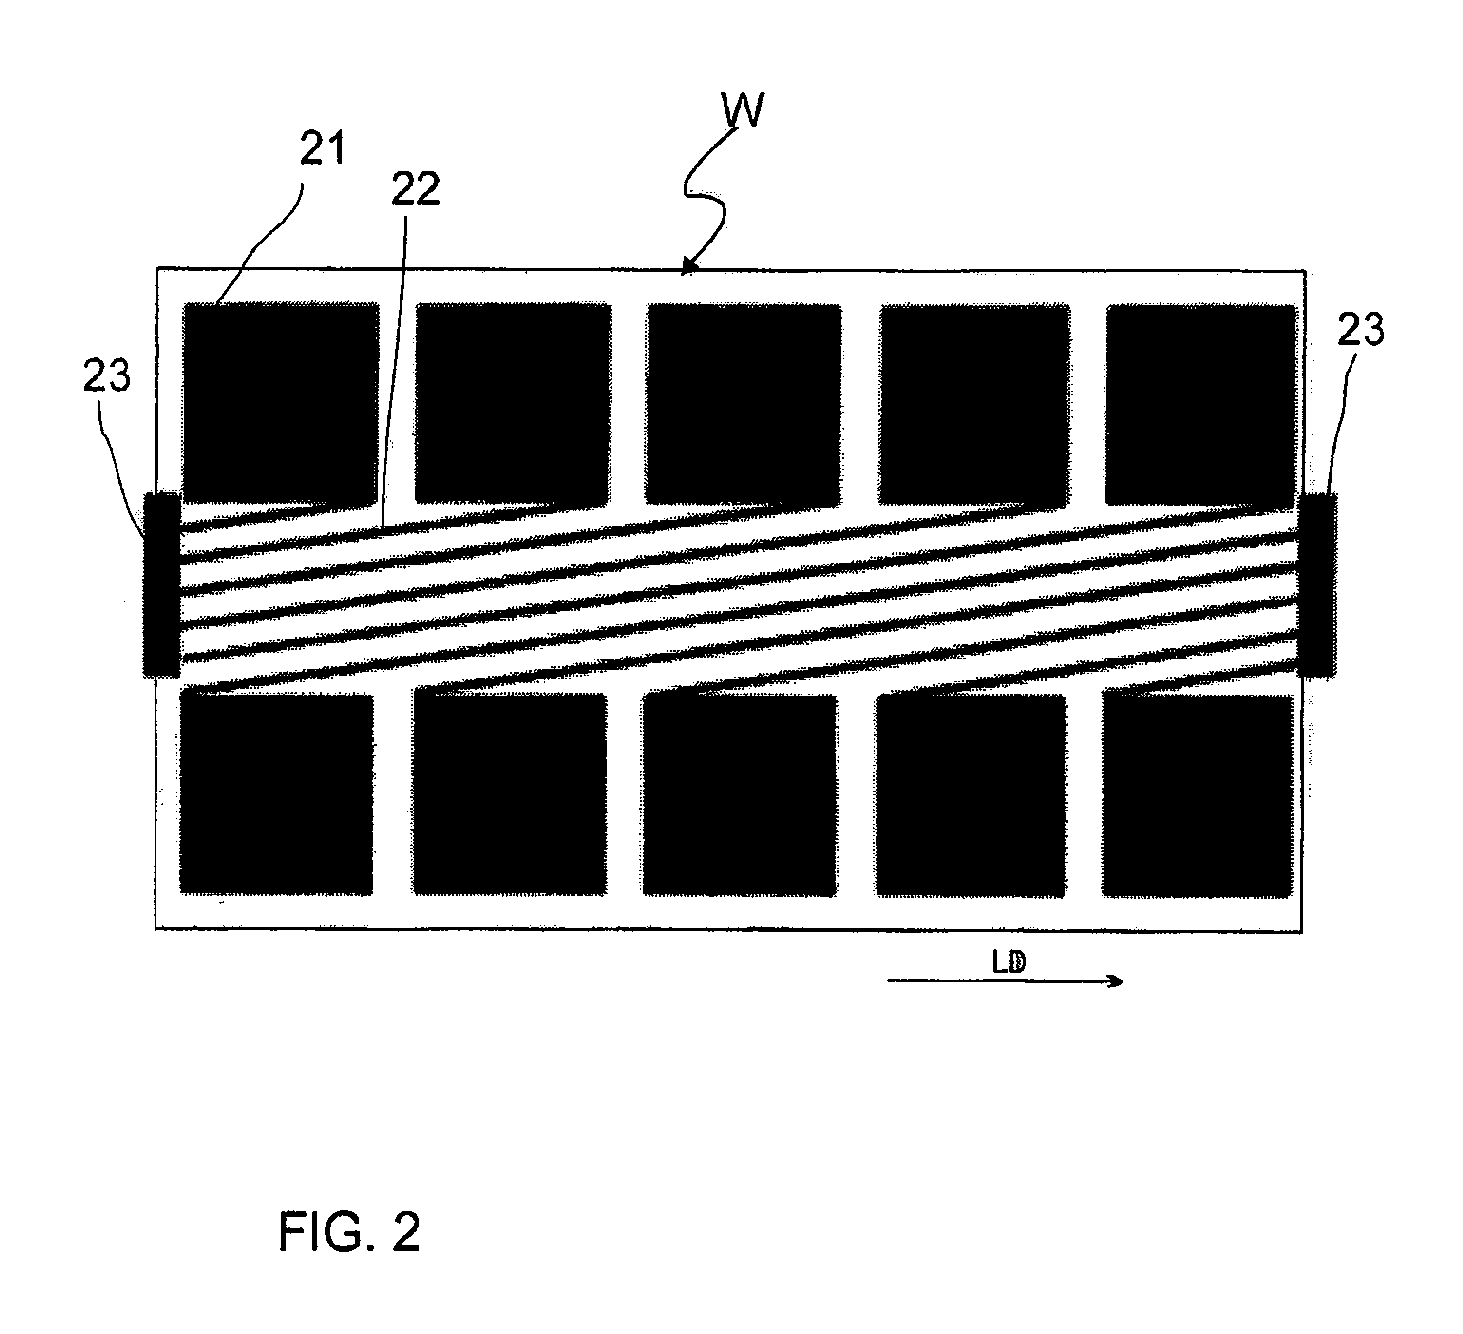 System for controlling elevators in an elevator system